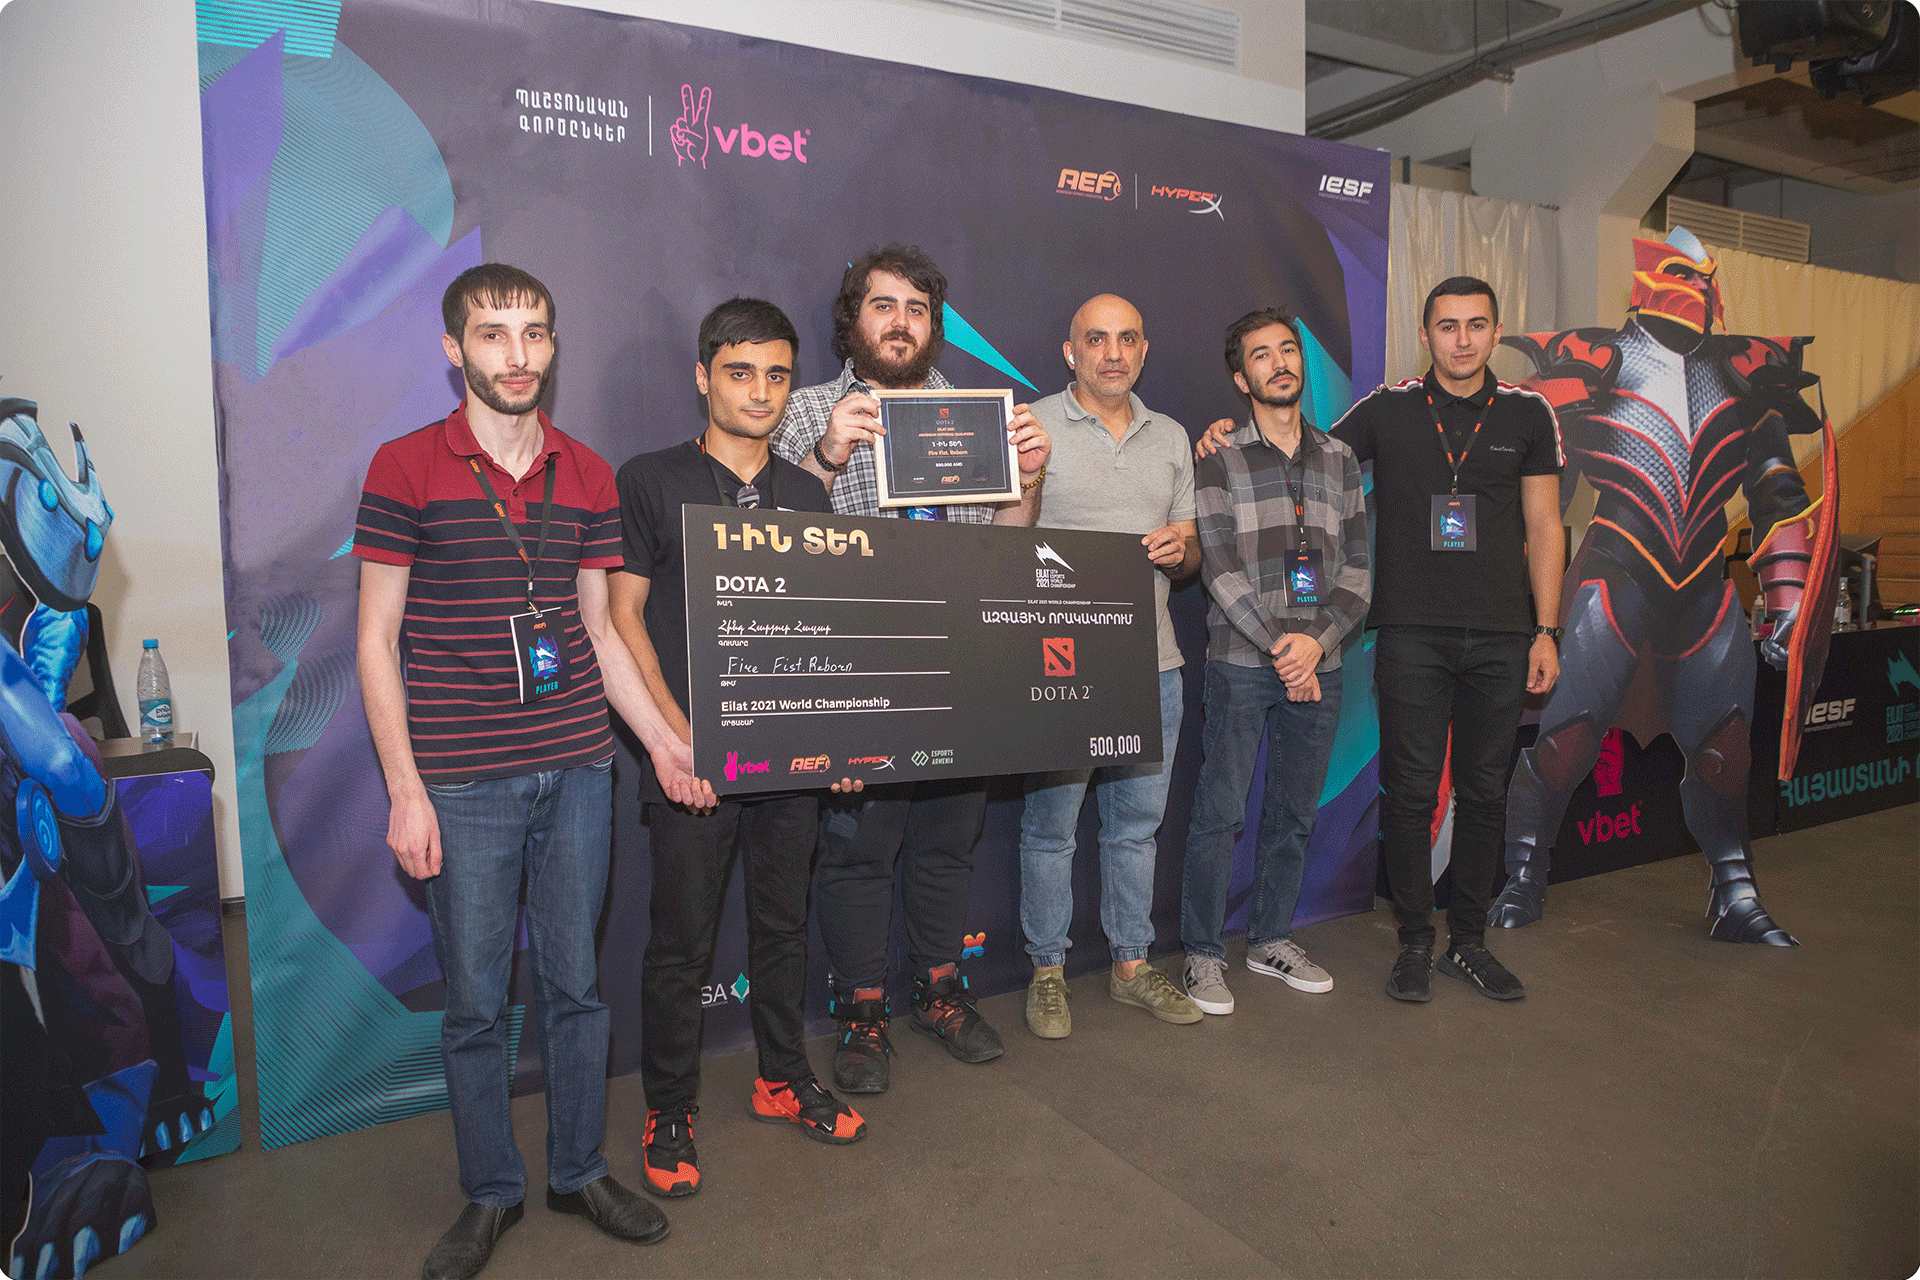 EILAT 2021 DOTA 2 National Qualifiers ended on August 7